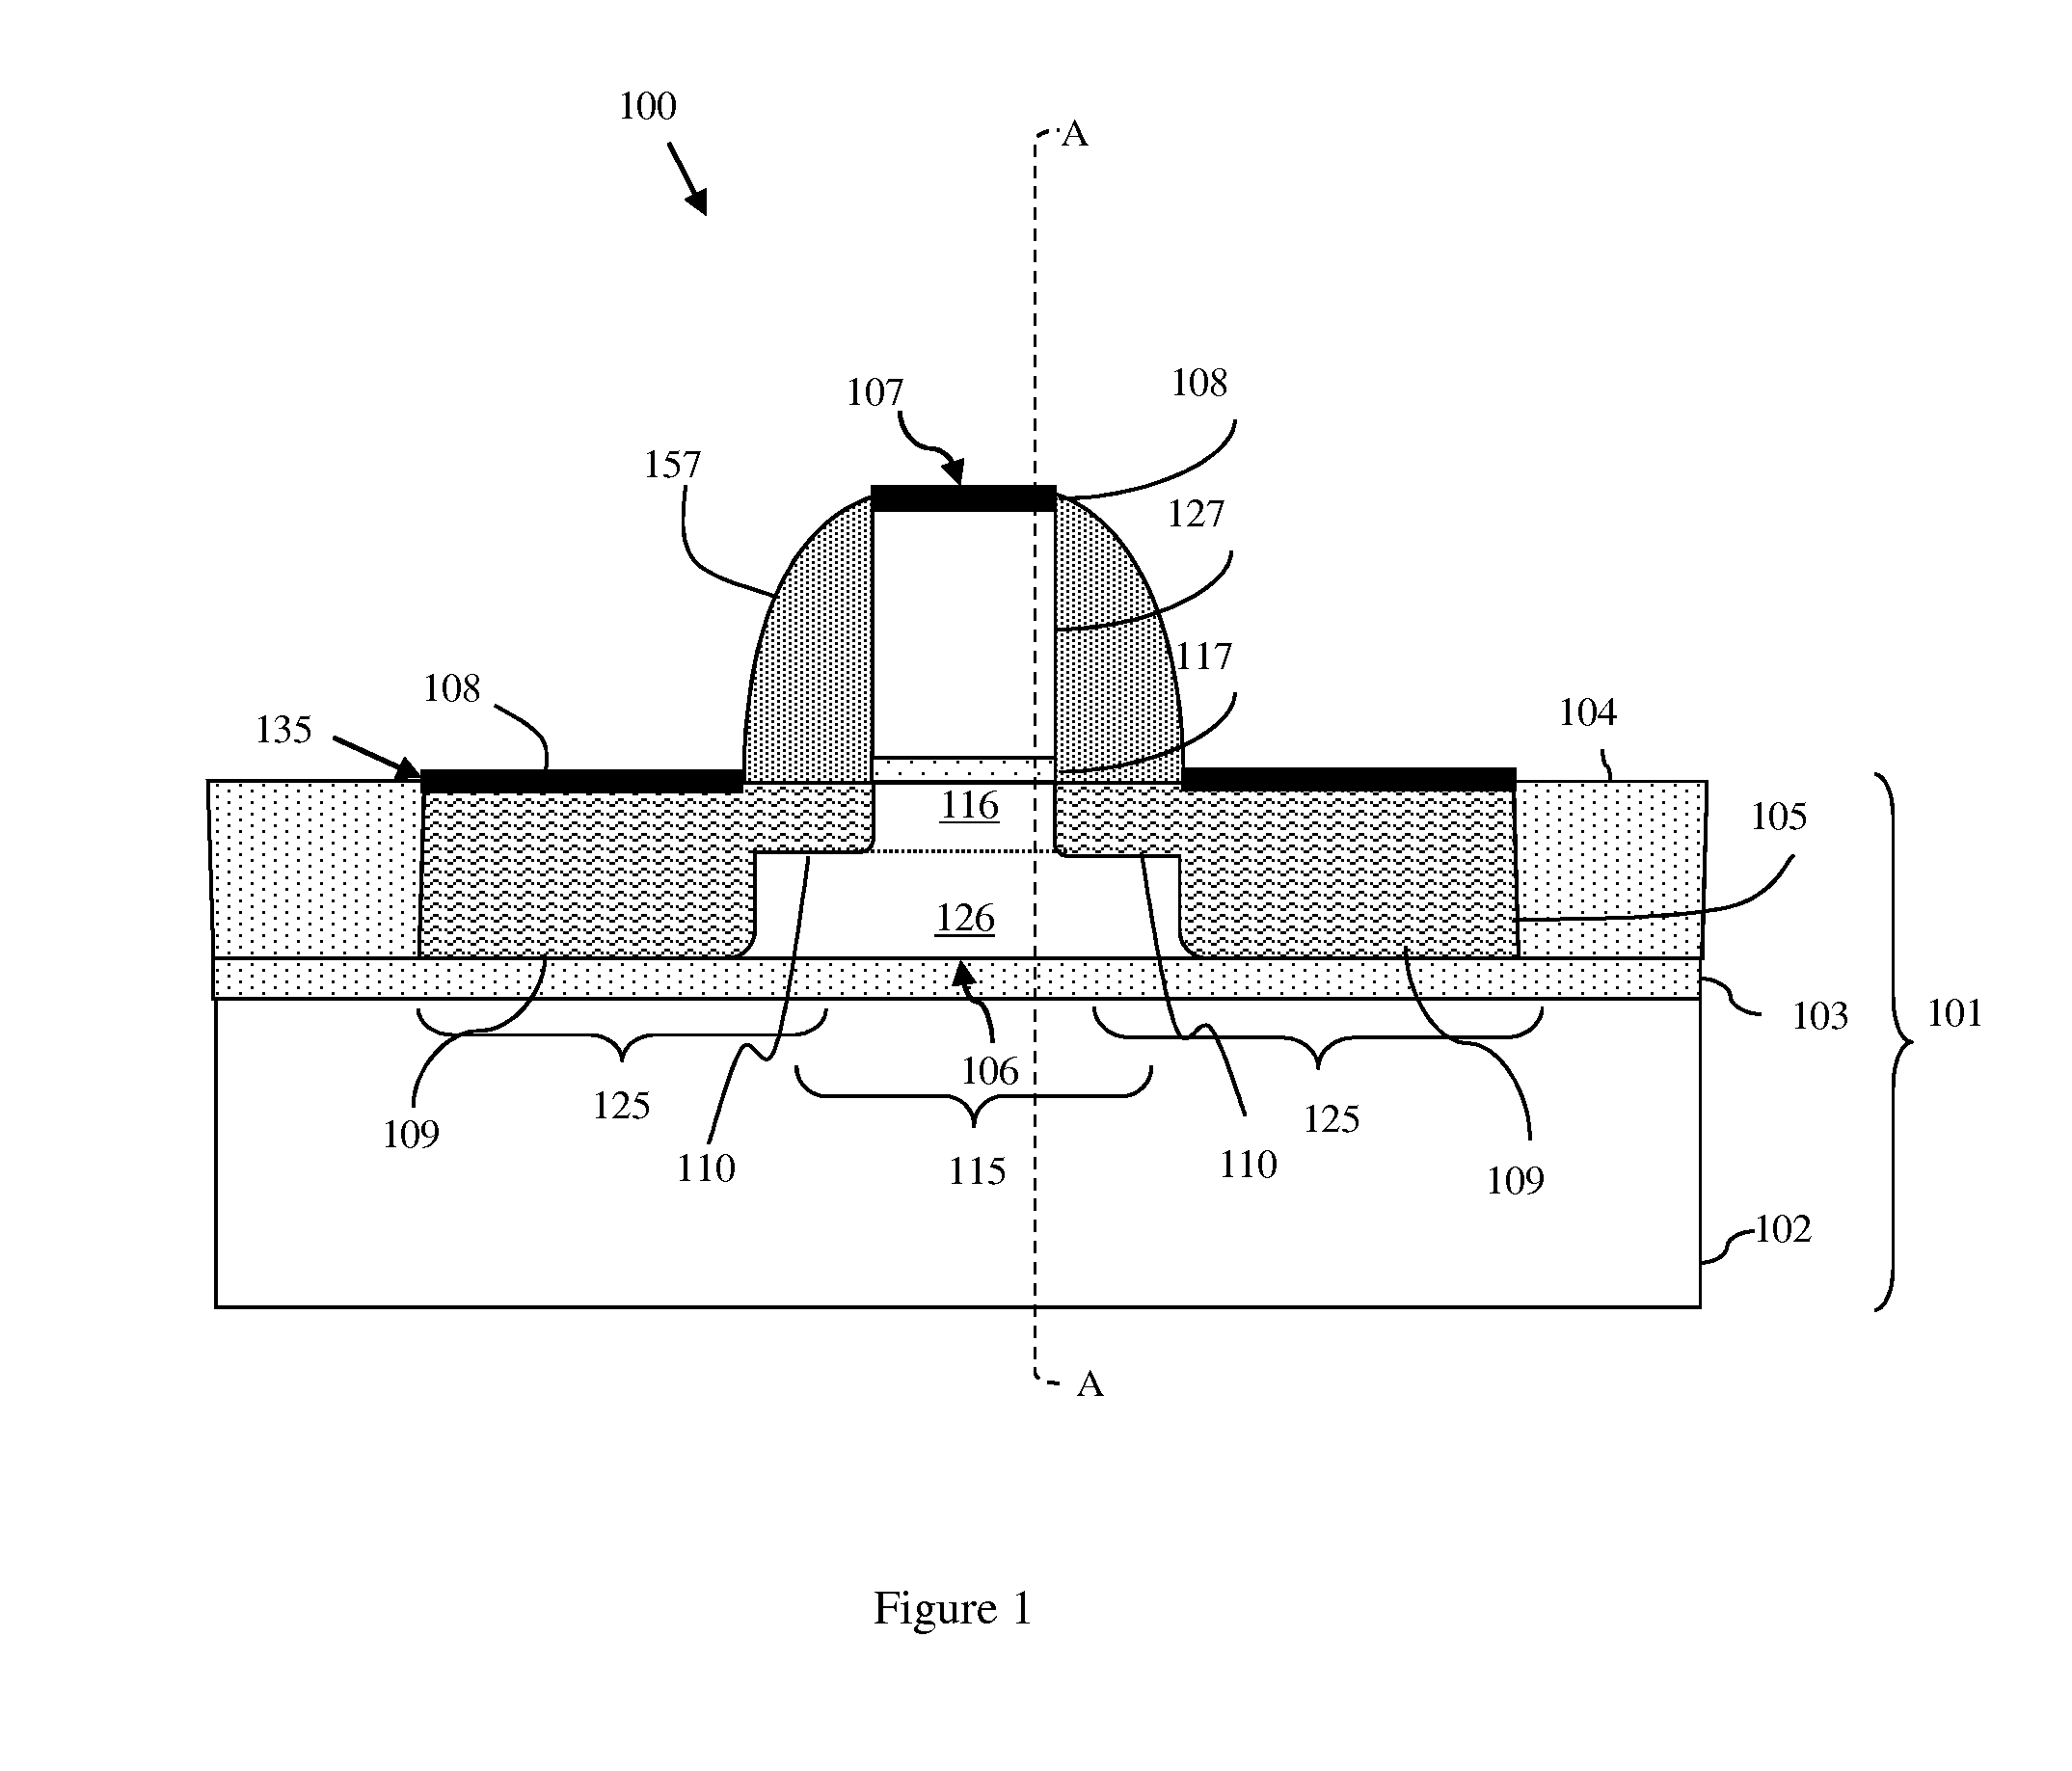 PARTIALLY DEPELETED (DP) SEMICONDUCTOR-ON-INSULATOR (SOI) FIELD EFFECT TRANSISTOR (FET) STRUCTURE WITH A GATE-TO-BODY TUNNEL CURRENT REGION FOR THRESHOLD VOLTAGE (Vt) LOWERING AND METHOD OF FORMING THE STRUCTURE